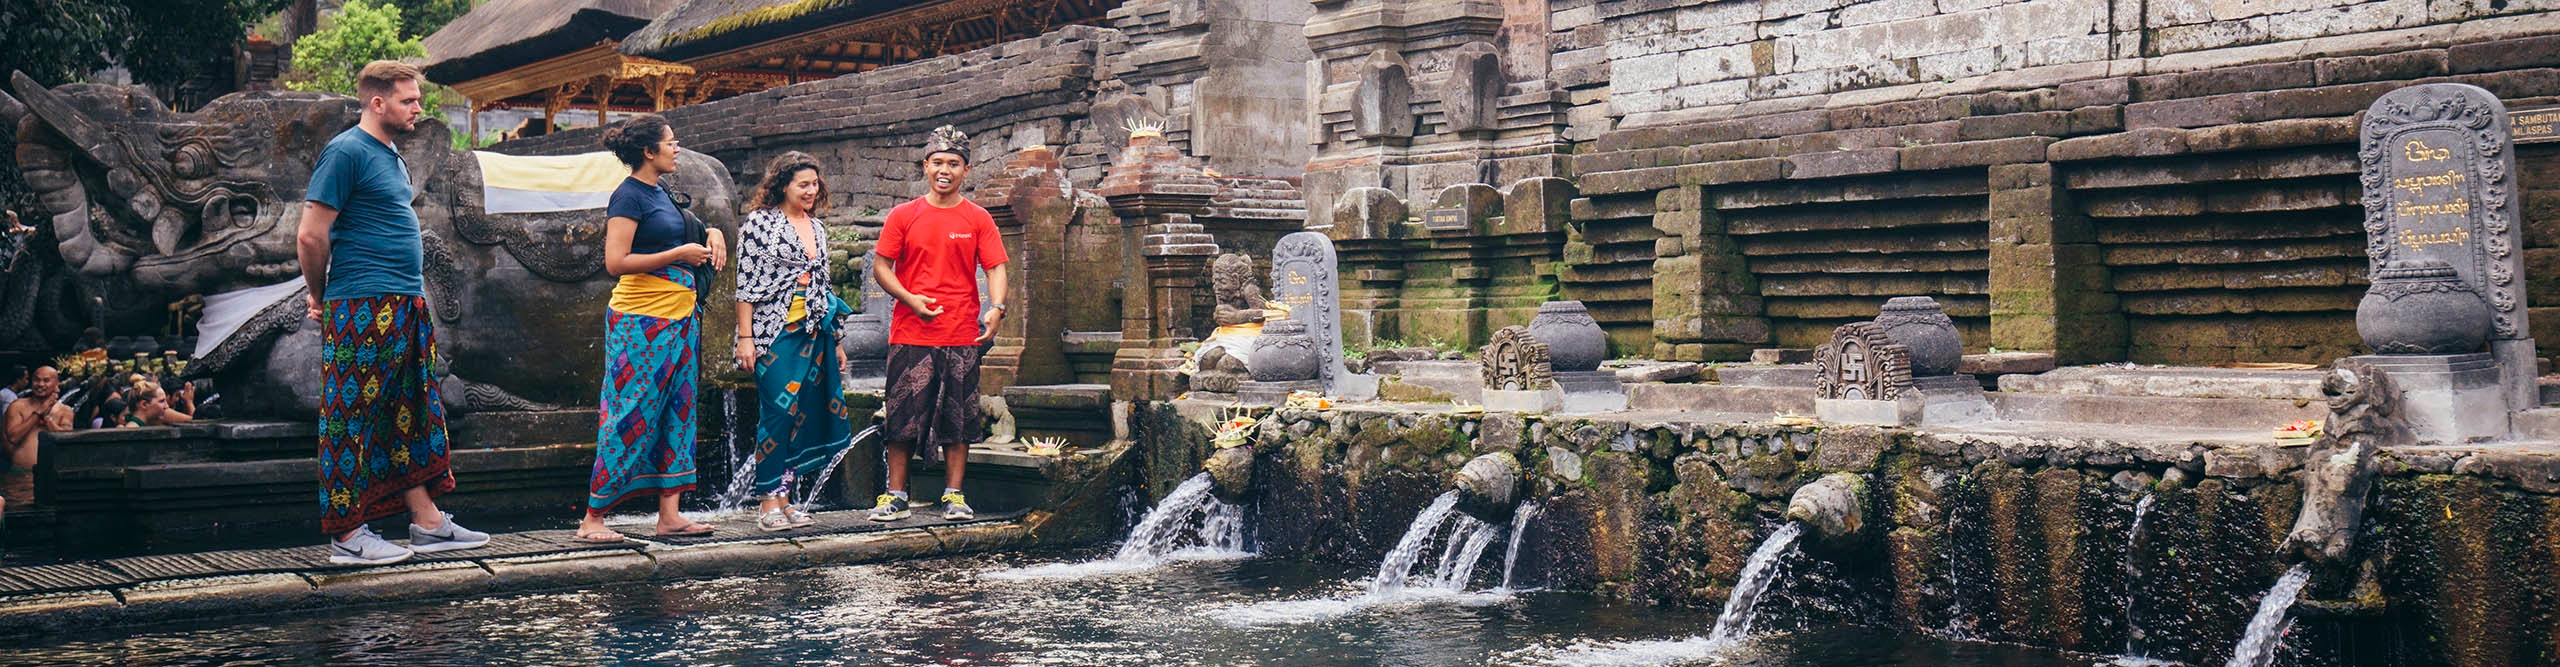 Tourists with their guide at a temple in Bali 